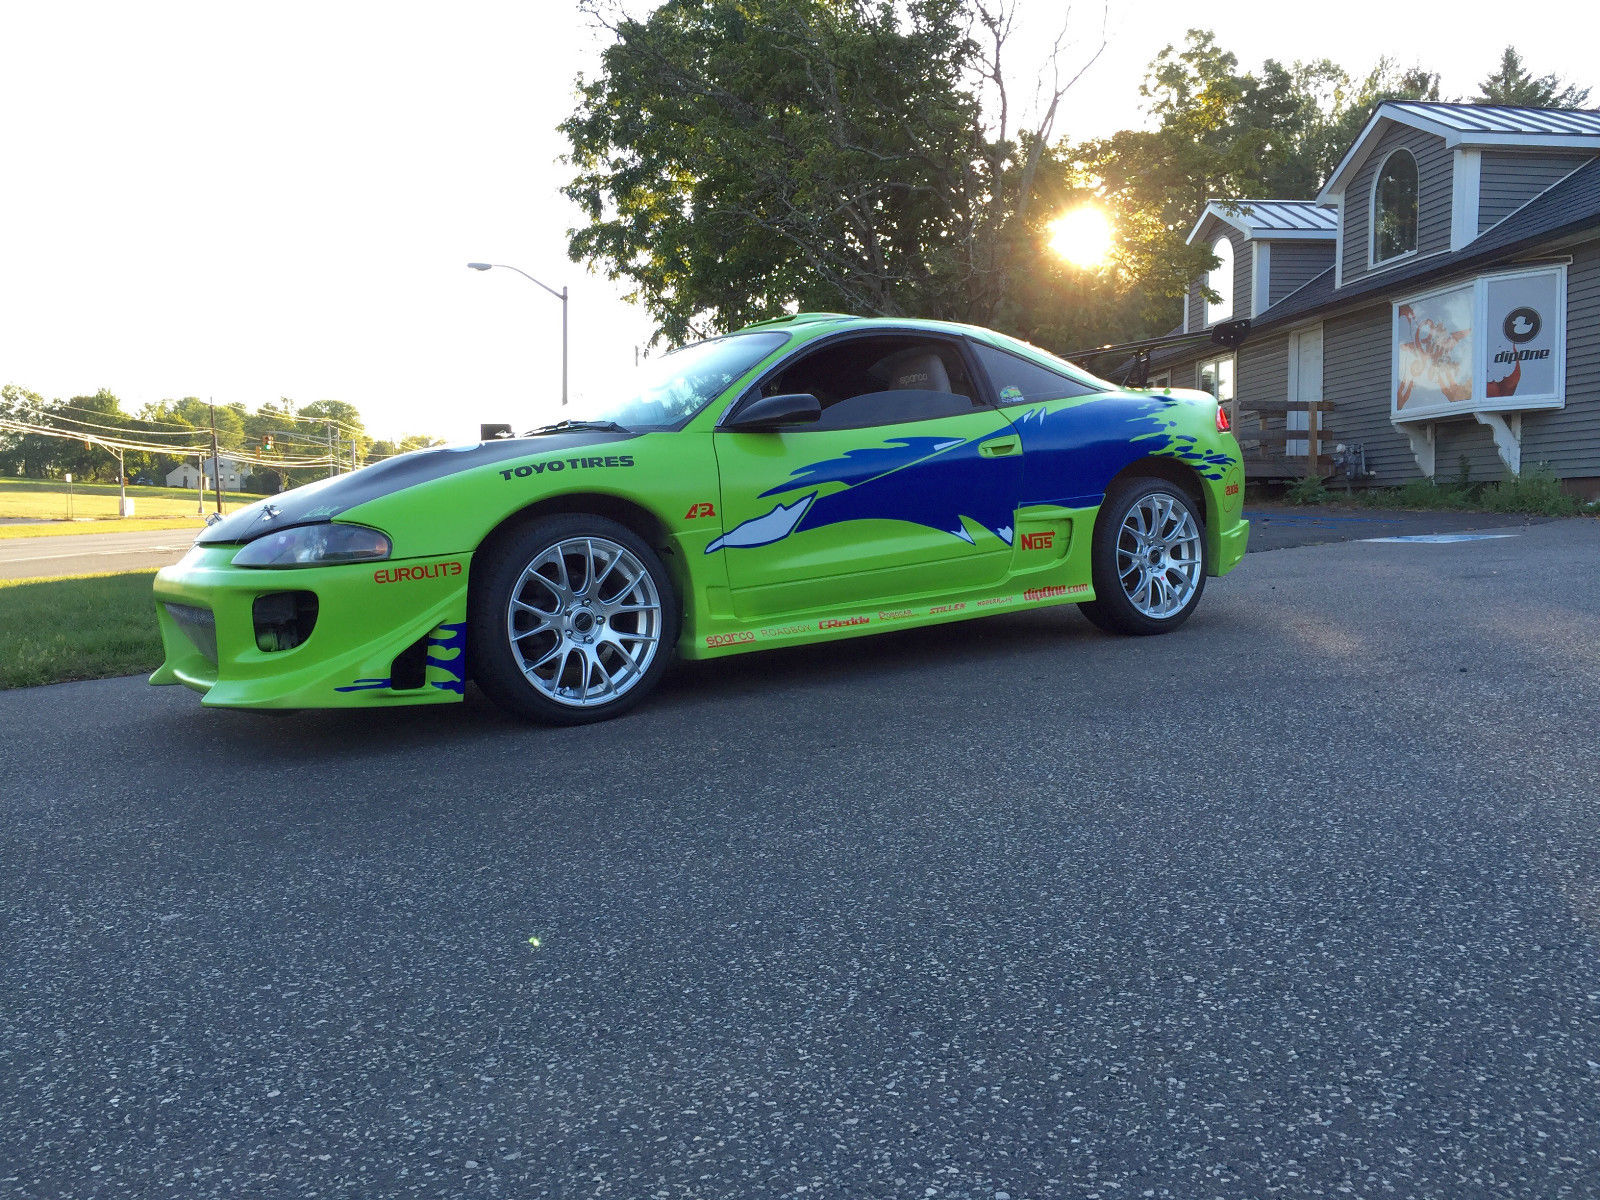 Replica Of The Mitsubishi Eclipse Paul Walker Drove In The Fast And The Furious Is On Sale Autoevolution